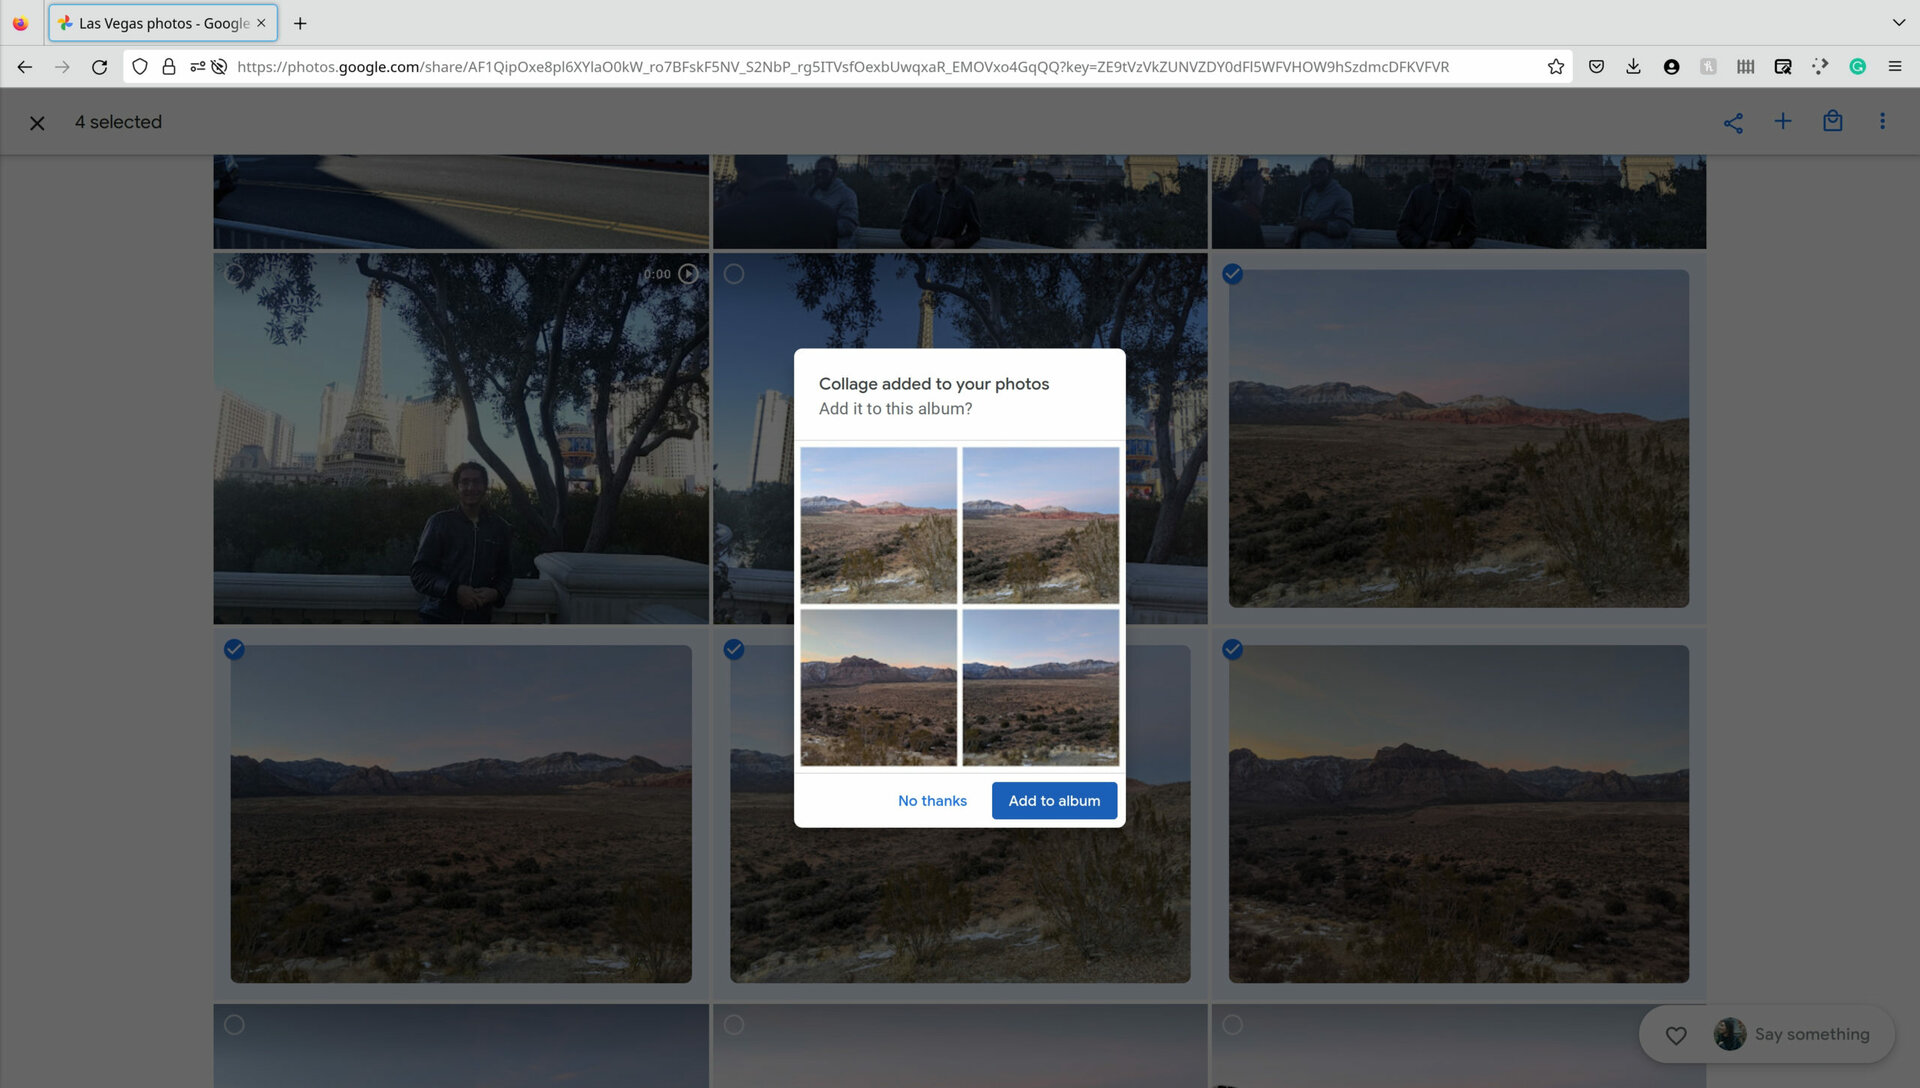 A screenshot of the Google Photos desktop website showing a pop-up window asking if the collage to be created should be added to the exisiting album.